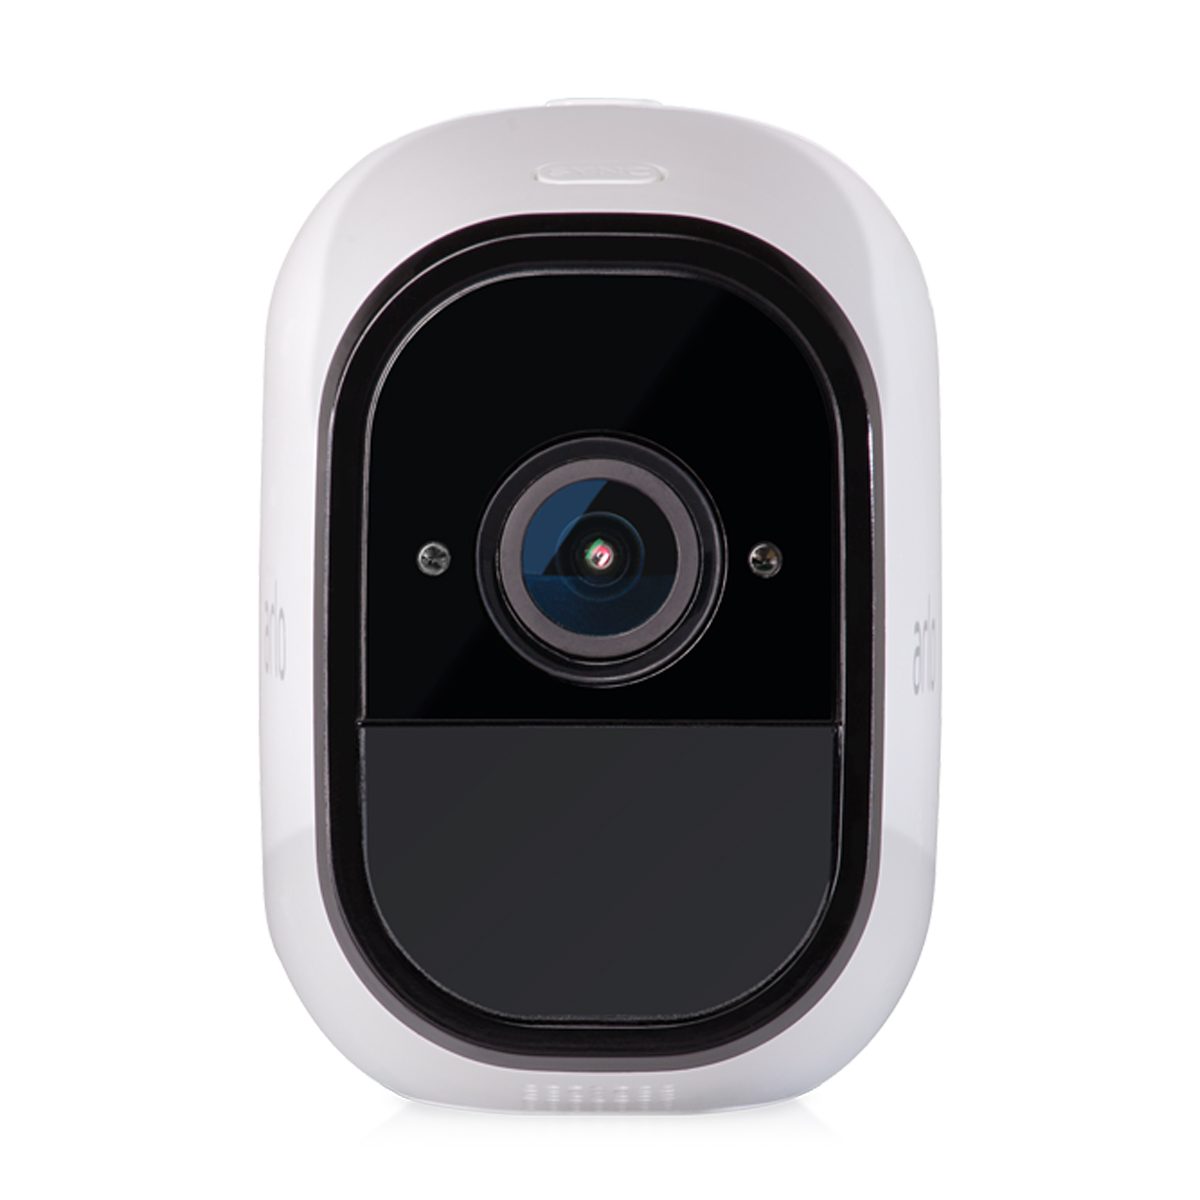 <p>The <a href="https://www.amazon.com/Arlo-Security-System-Siren-VMS4330-100NAS/dp/B01LWS96JV/?tag=fhm_msn-20" rel="nofollow noopener noreferrer">Arlo Pro</a> records HD video indoors or out but that video suffers from what photographers call "fish eye" distortion at the edges of the recorded image. And the PIR (Programmed InfraRed) motion sensor covers almost as much area as the 130-degree wide-angle camera lens does. So movement in the covered area will be automatically recorded. This Wi-Fi security camera also has a piercing 100+dB siren with multiple triggers. Also, Arlo is from a major player in the wireless networking field, Netgear.</p> <p>Make sure you know the <a href="https://www.familyhandyman.com/list/the-ultimate-guide-for-secret-hiding-places-in-your-home/">50 places thieves will never look</a> in your home as you set up a home security camera.</p> <p>Photo: Courtesy of <a href="https://www.arlo.com/en-us/images/Arlov2/ProductPages/ArloPro/VMC4030_Front_Transparent.png" rel="nofollow noopener noreferrer">Arlo</a></p>